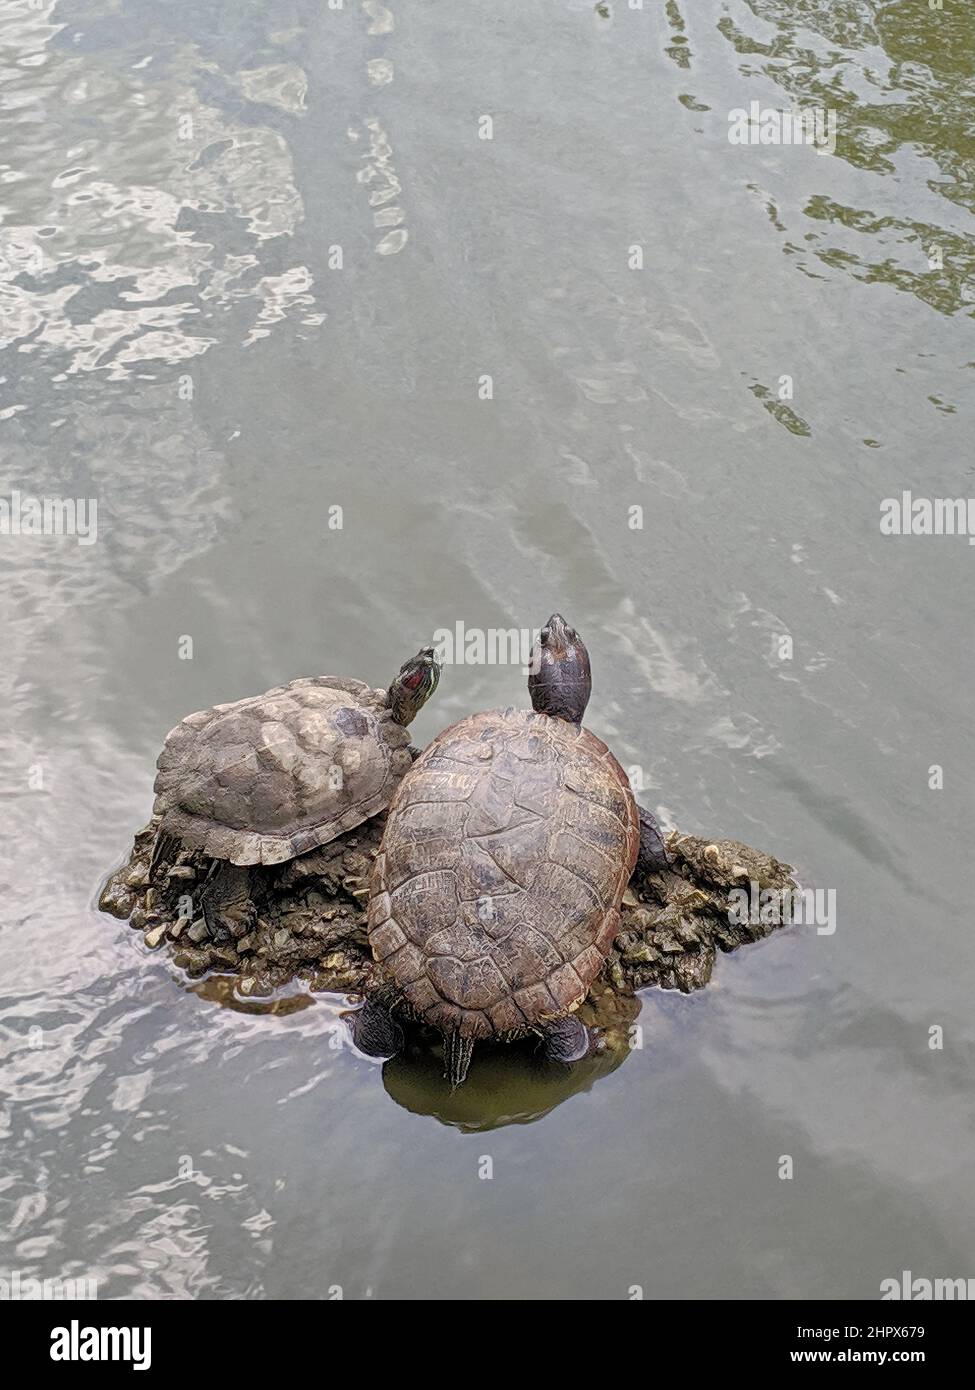 Two turtles relax on a rock surrounded with ripple water in a pond. Stock Photo